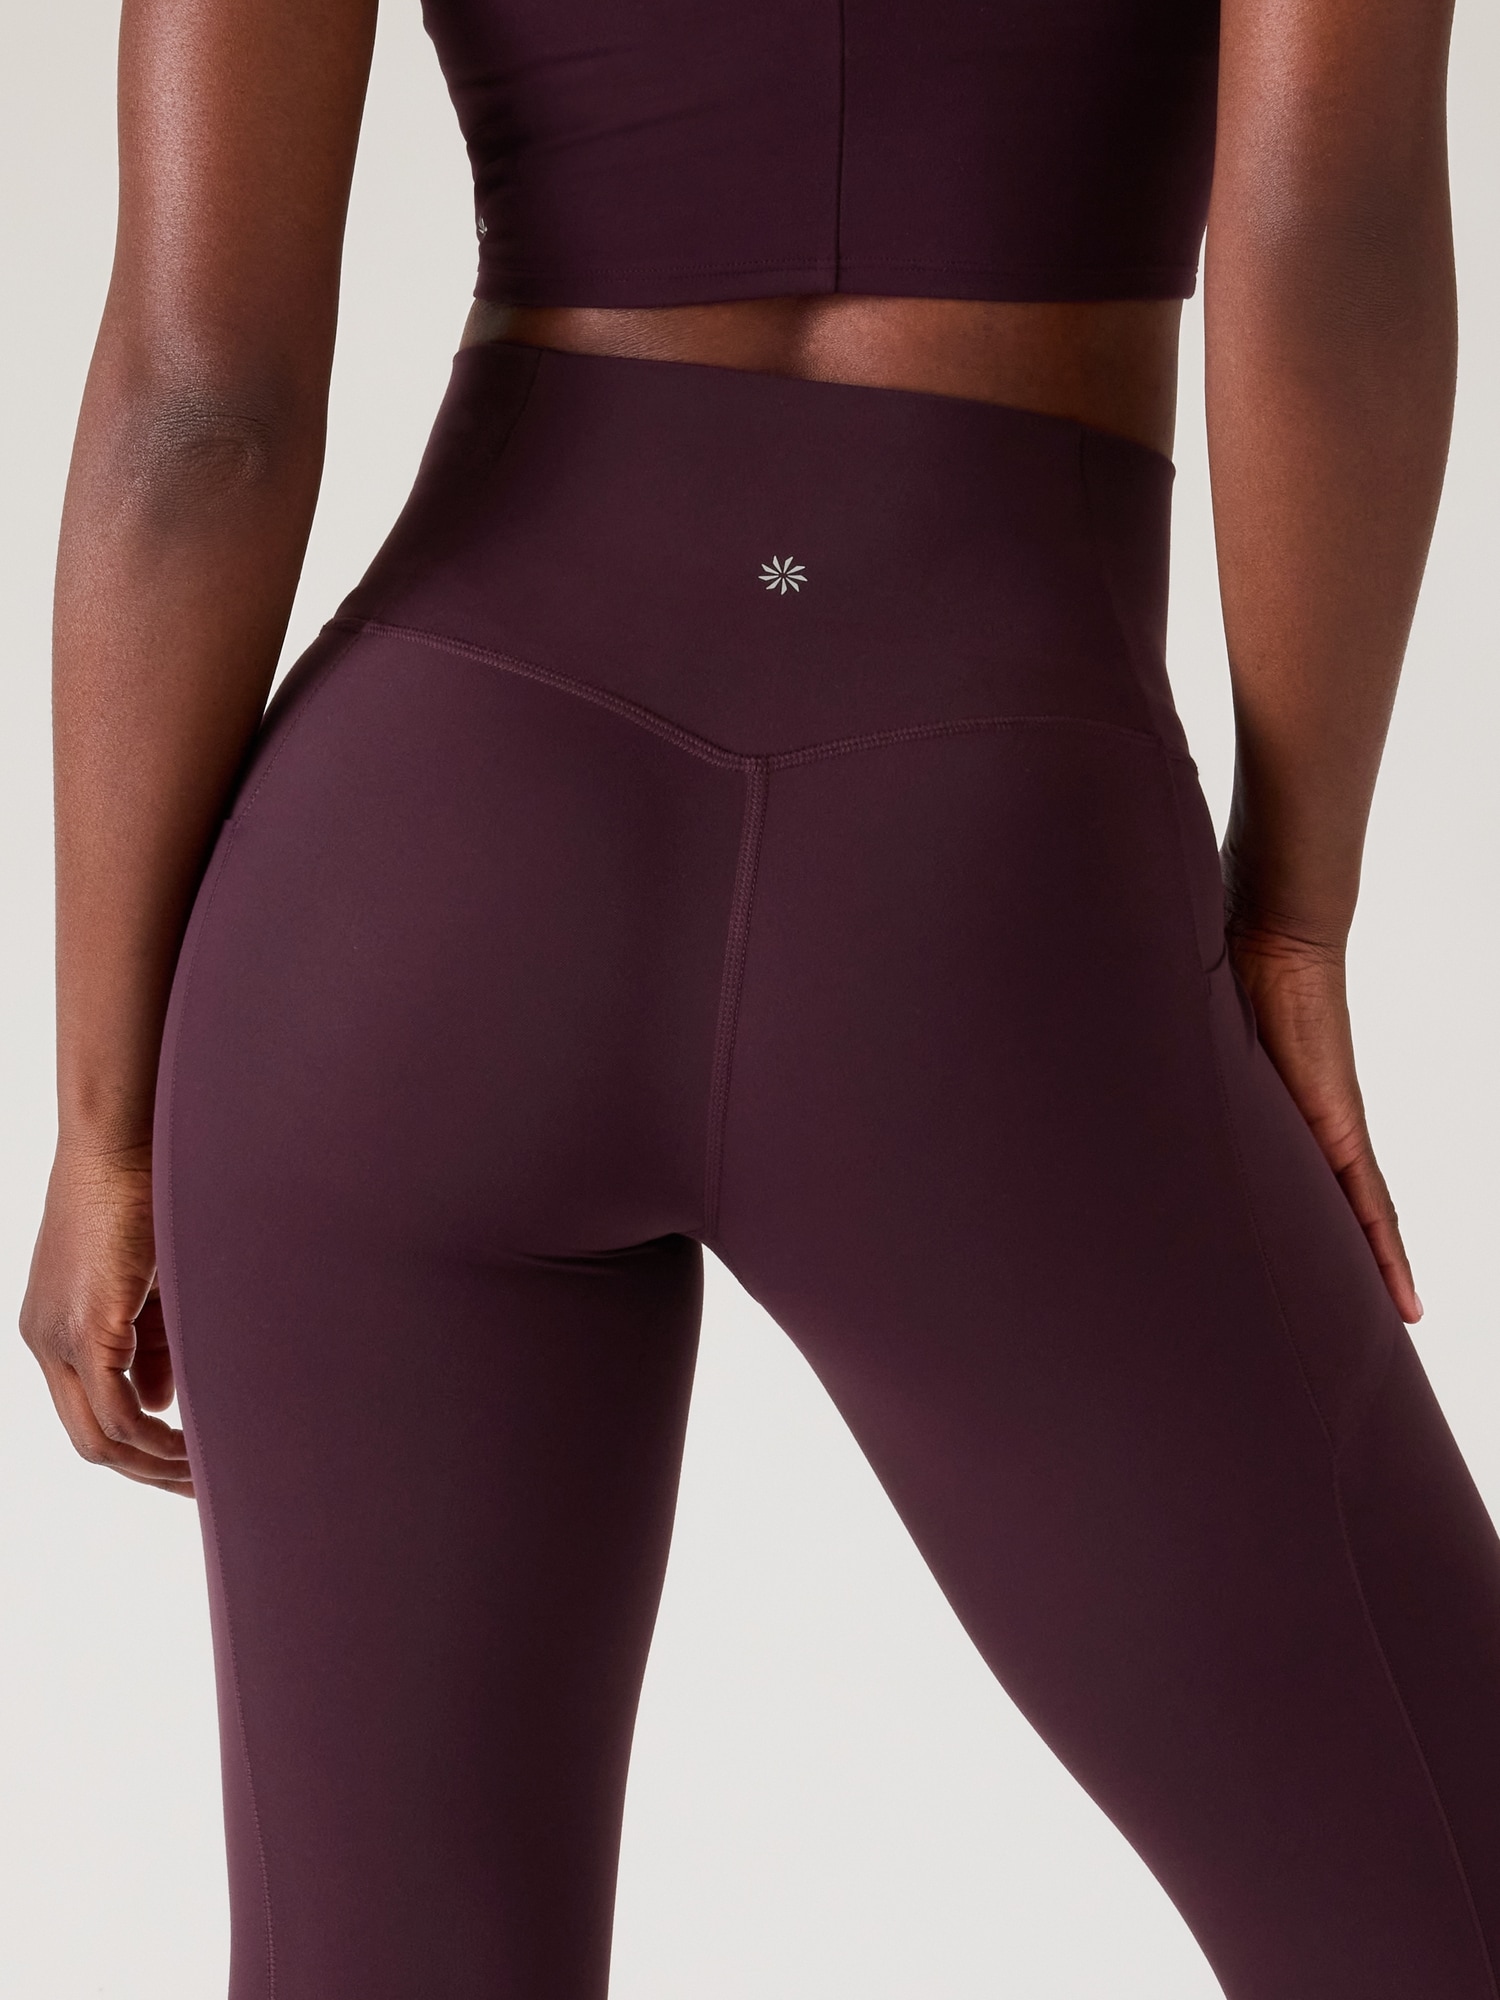 Buy NEVER QUIT Capris - 3/4 Compression Tights for Running